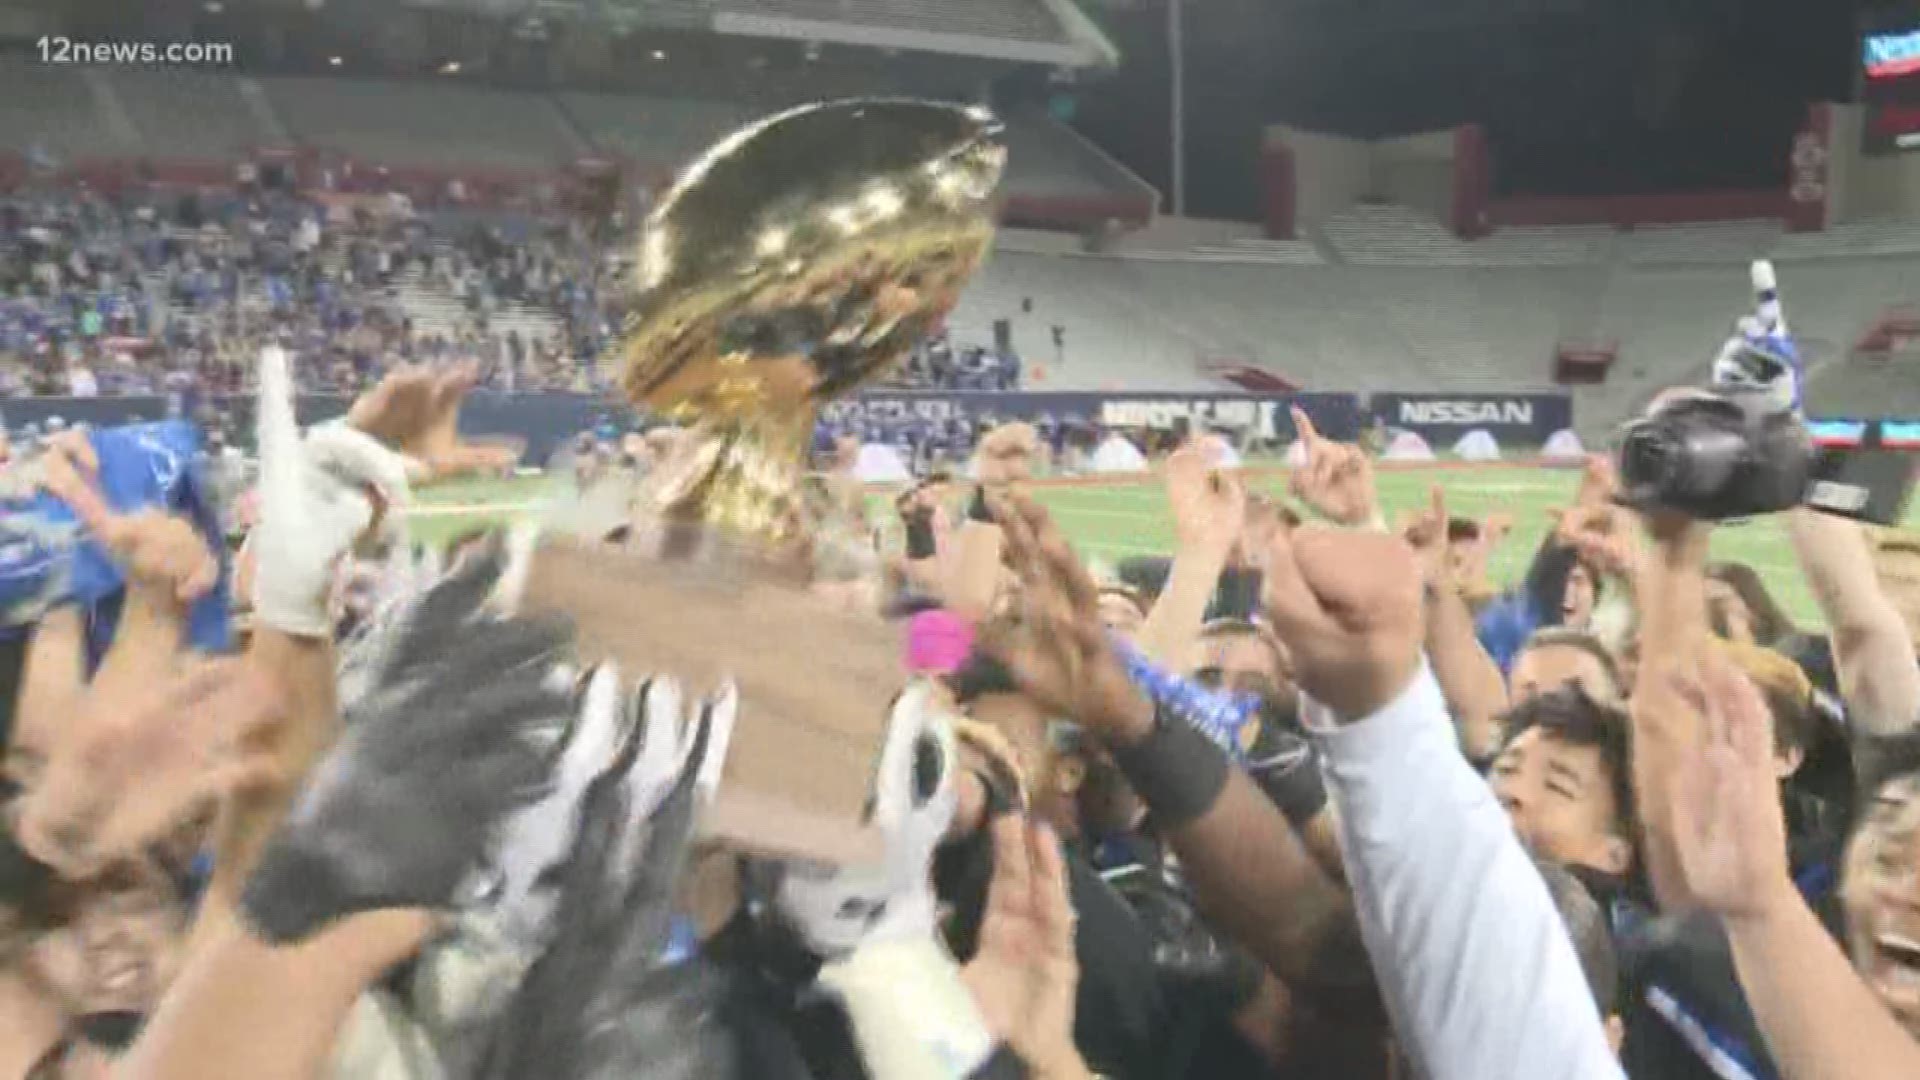 Chandler High School is no stranger to hoisting a championship trophy, having done it three times already. But do they have what it takes to do it a fourth time? Here's a look at the wolves under new Head Coach Rick Garretson.